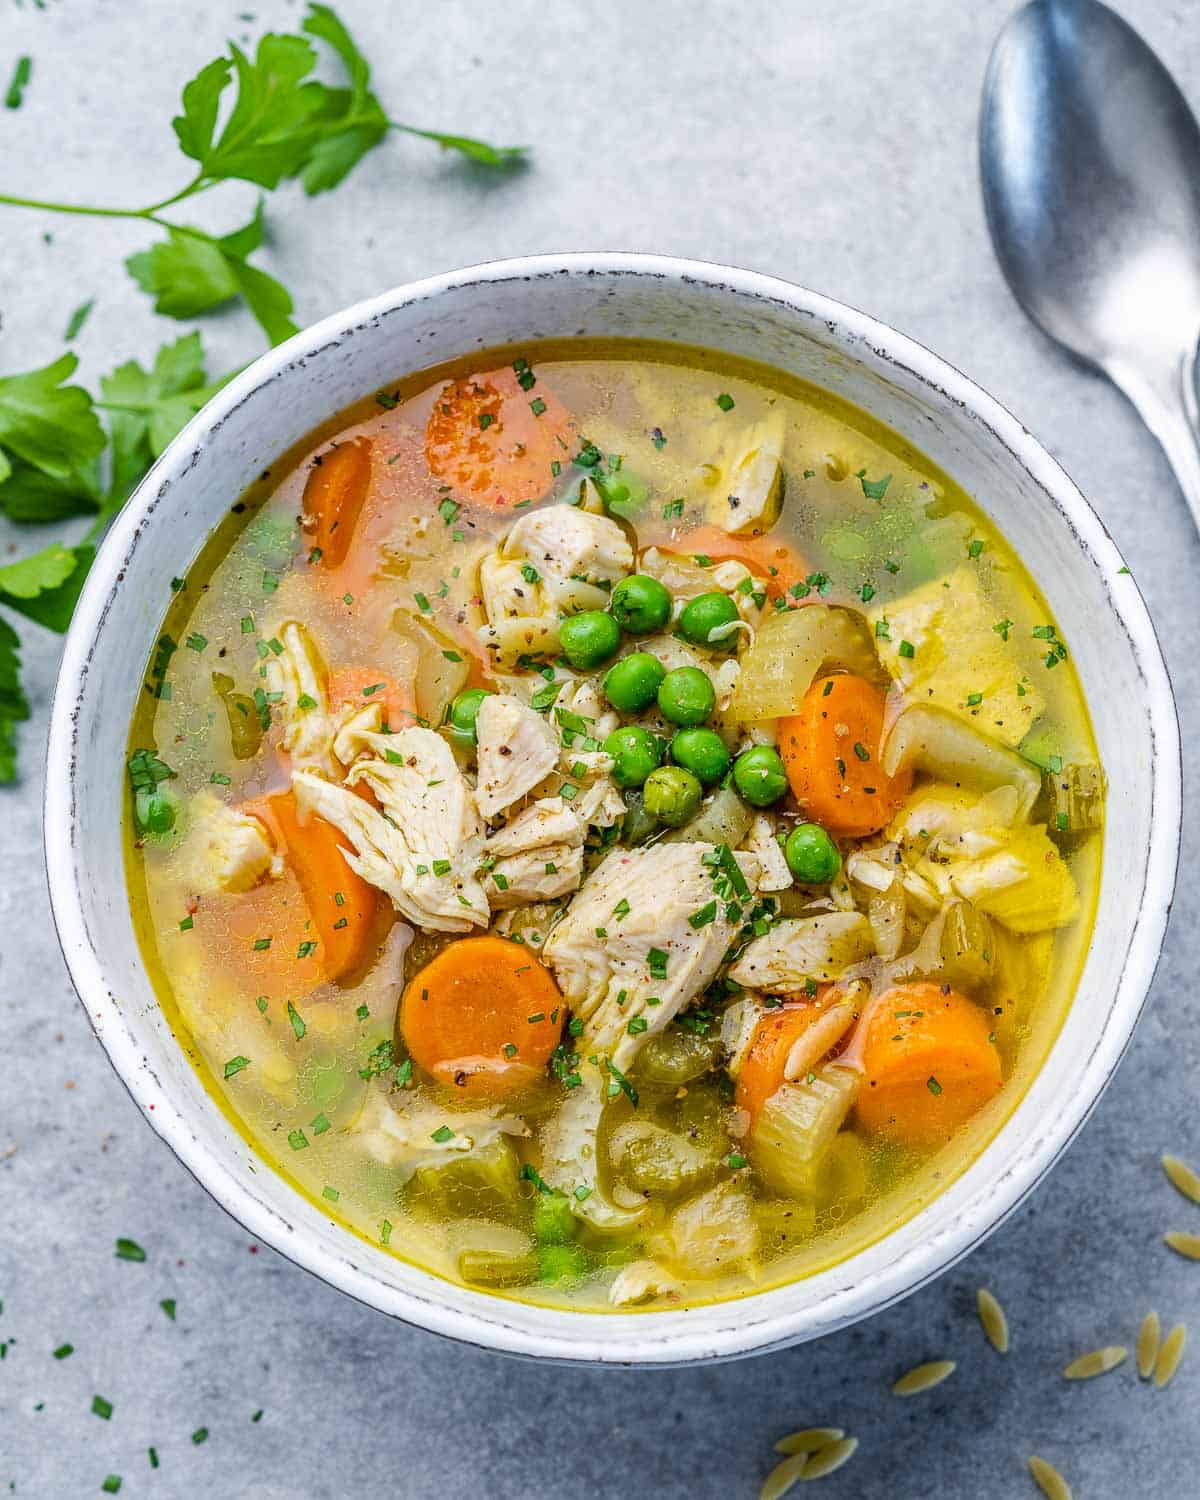 Soup with turkey, carrots and peas in a white bowl.